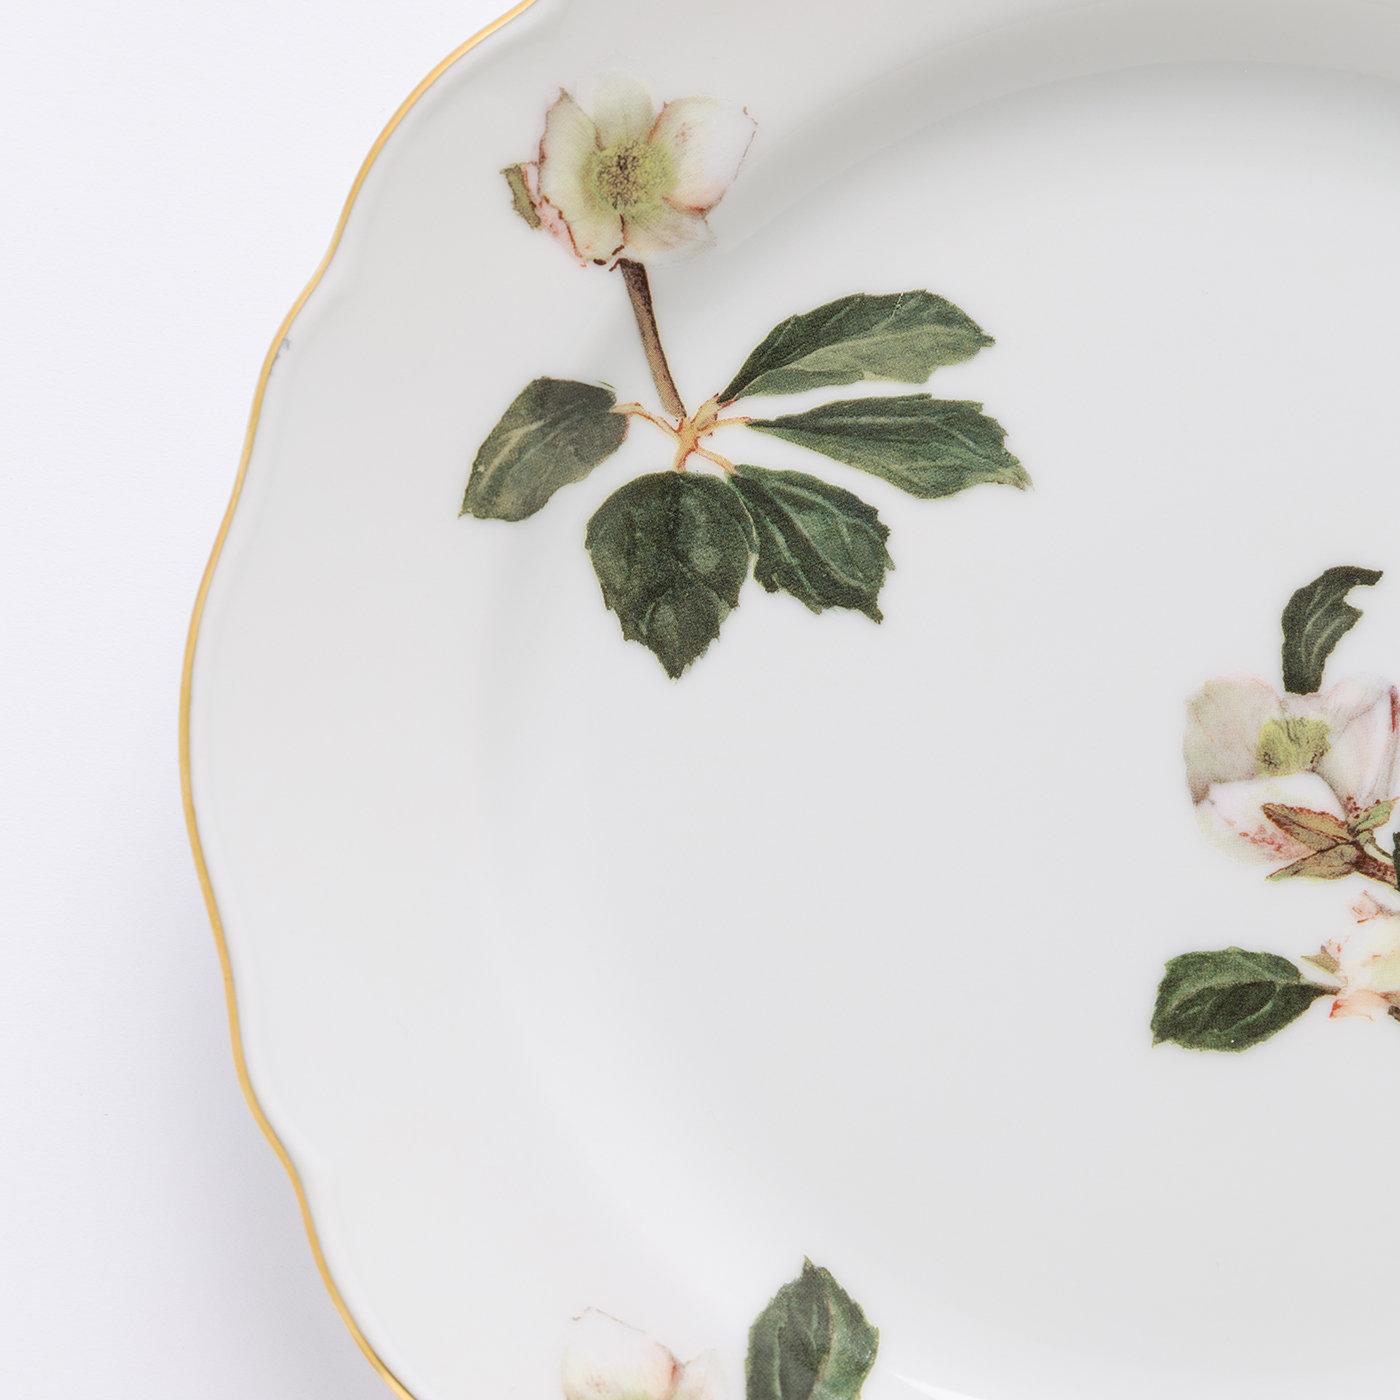 Striking in its delicacy, this set of four porcelain dinner plates belongs to the Helleborus Collection paying homage the charm of hellebores - commonly known as Christmas roses. A prized coating of 24K gold enhances the rim while complementing the